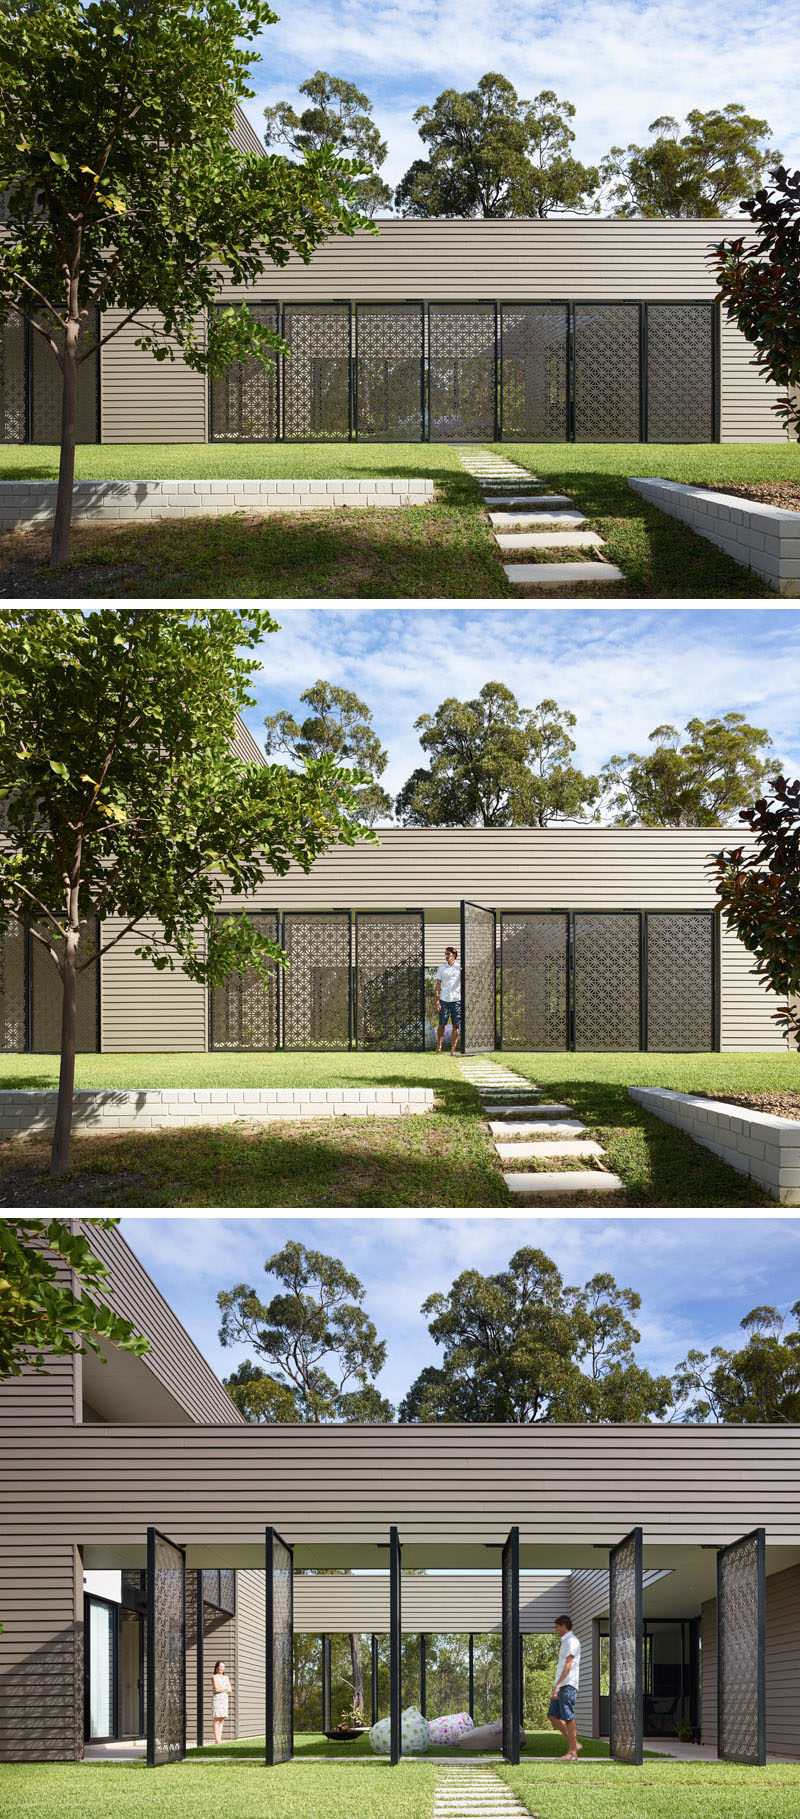 This modern house has a landscaped garden with a small path leads to a courtyard that's enclosed by decorative laser cut screens, that can pivot to enable the courtyard to be hidden when needed.